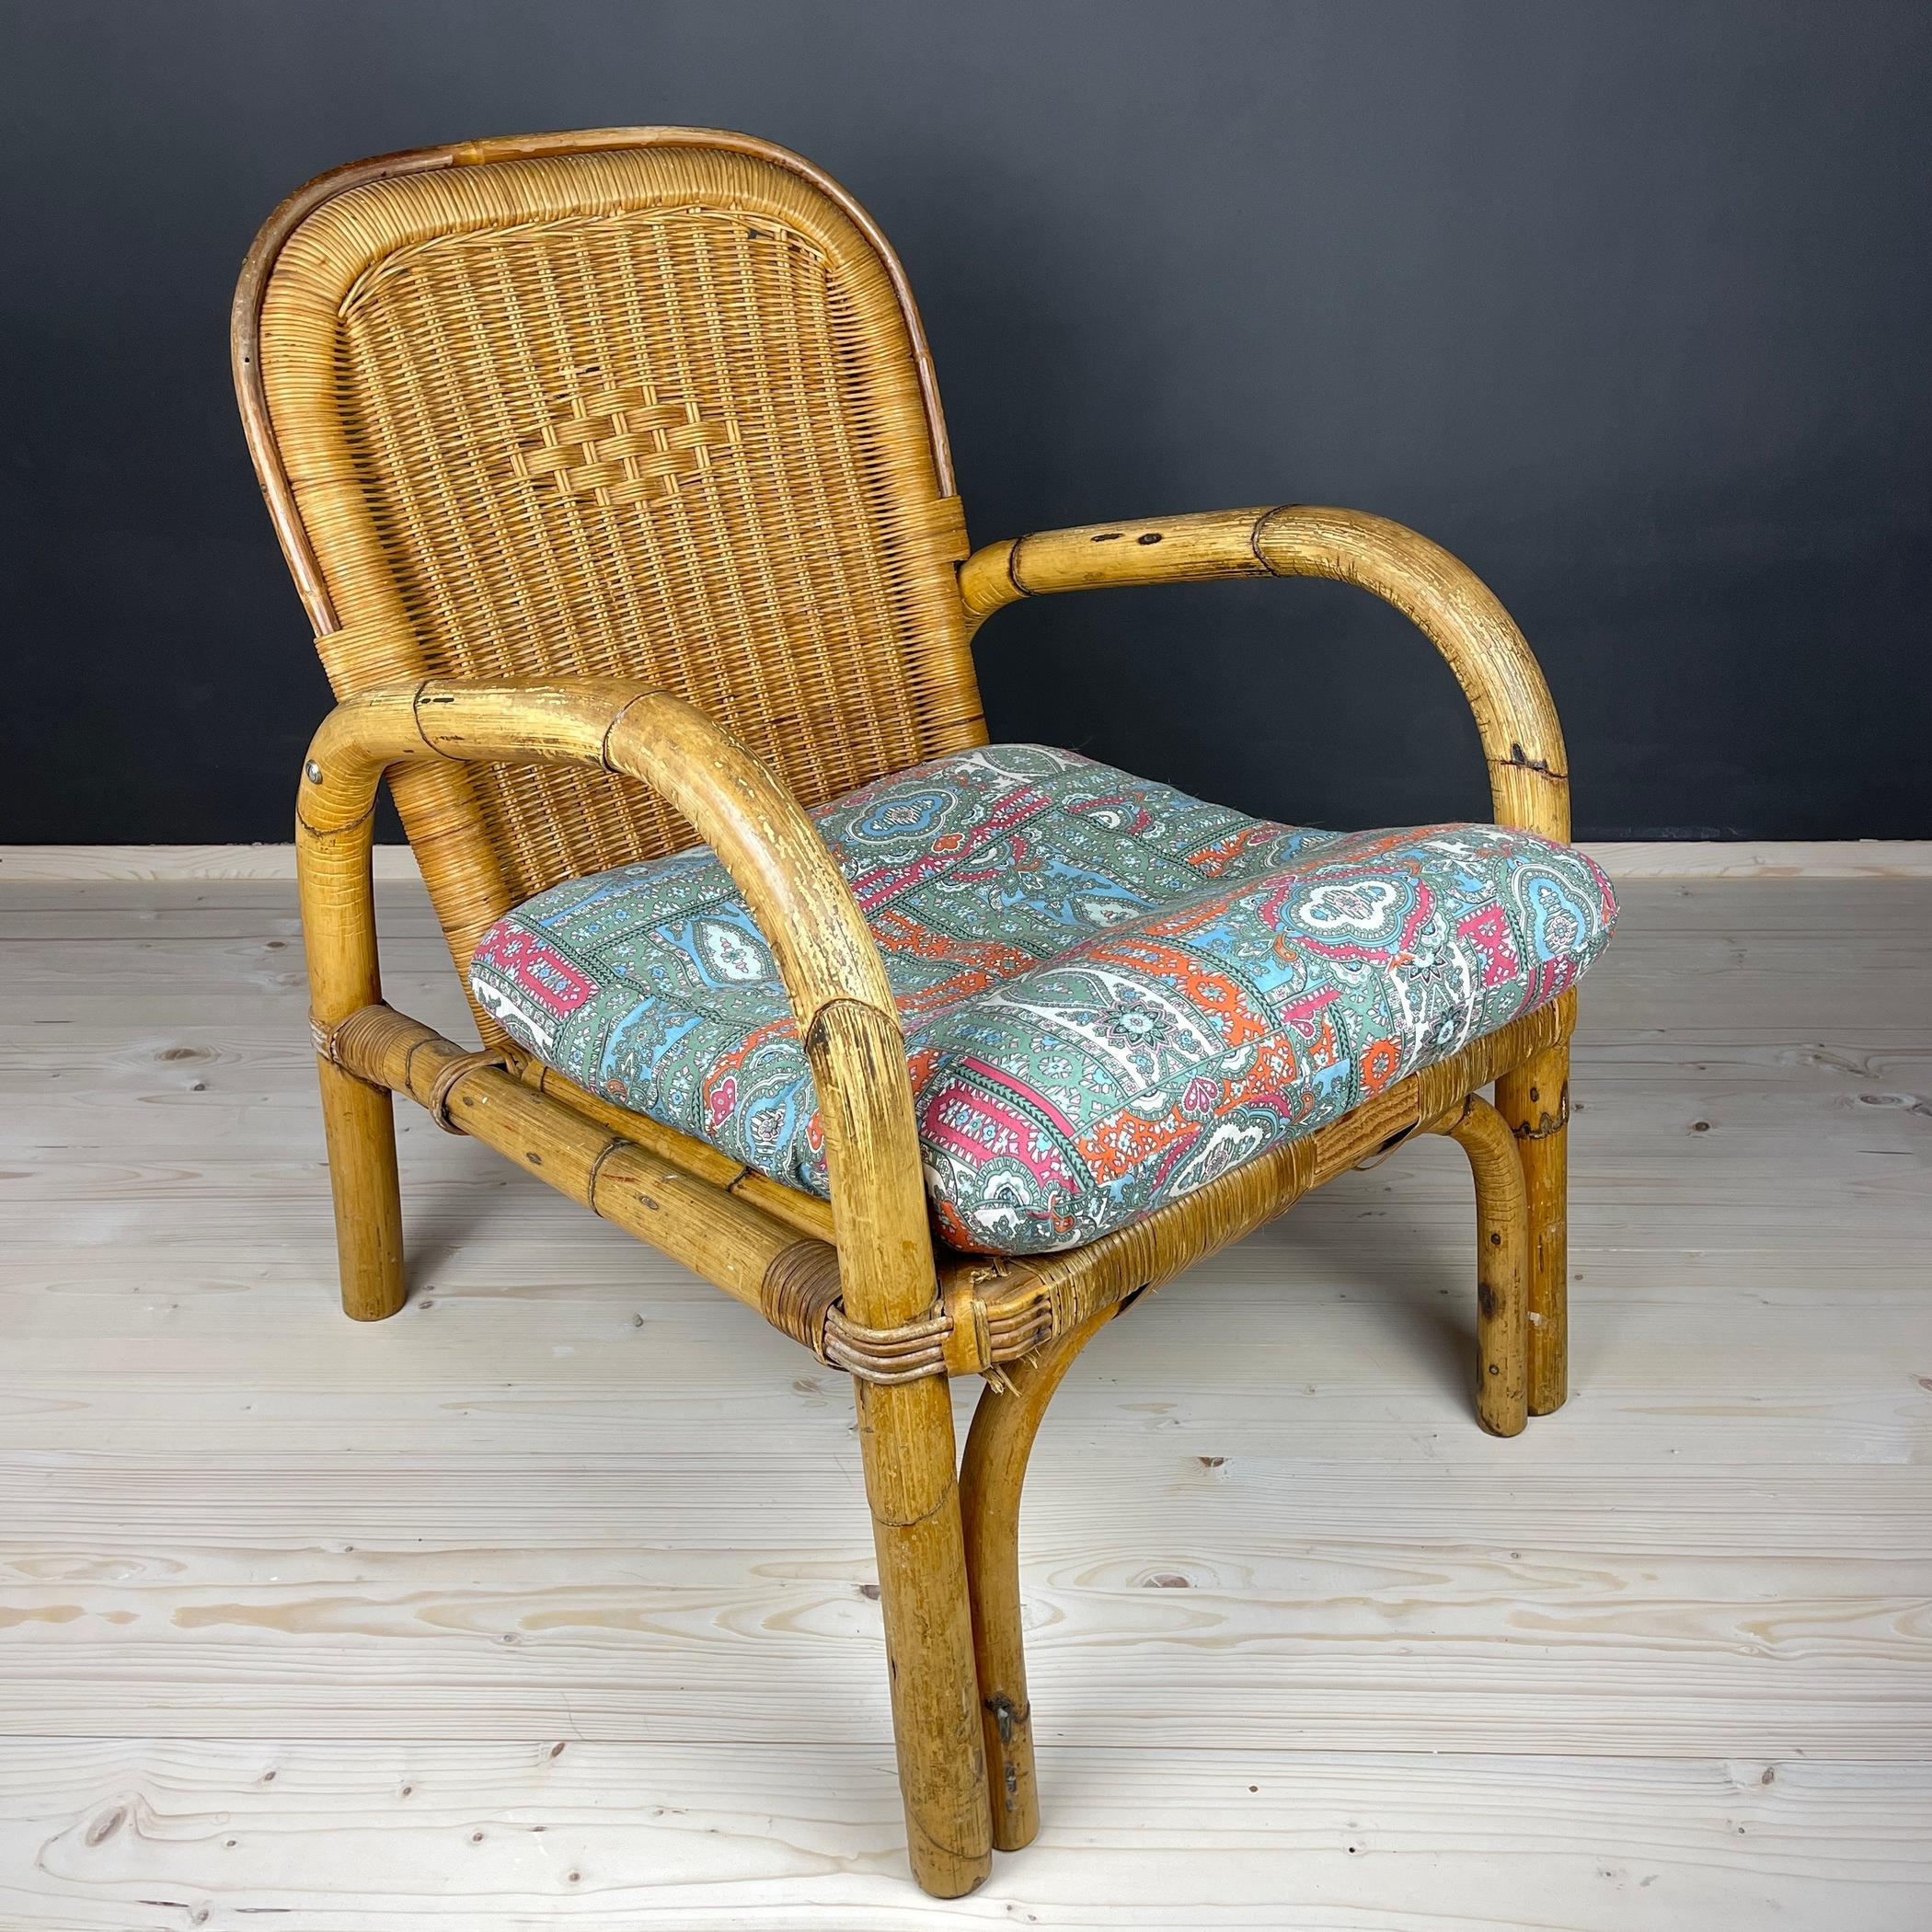 This stunning bent bamboo lazy lounge chair with arms originates from Italy in the 1950s, boasting a timeless design that adds a touch of natural elegance to any home.

Crafted with meticulous attention to detail, this chair exudes a Bohemian charm